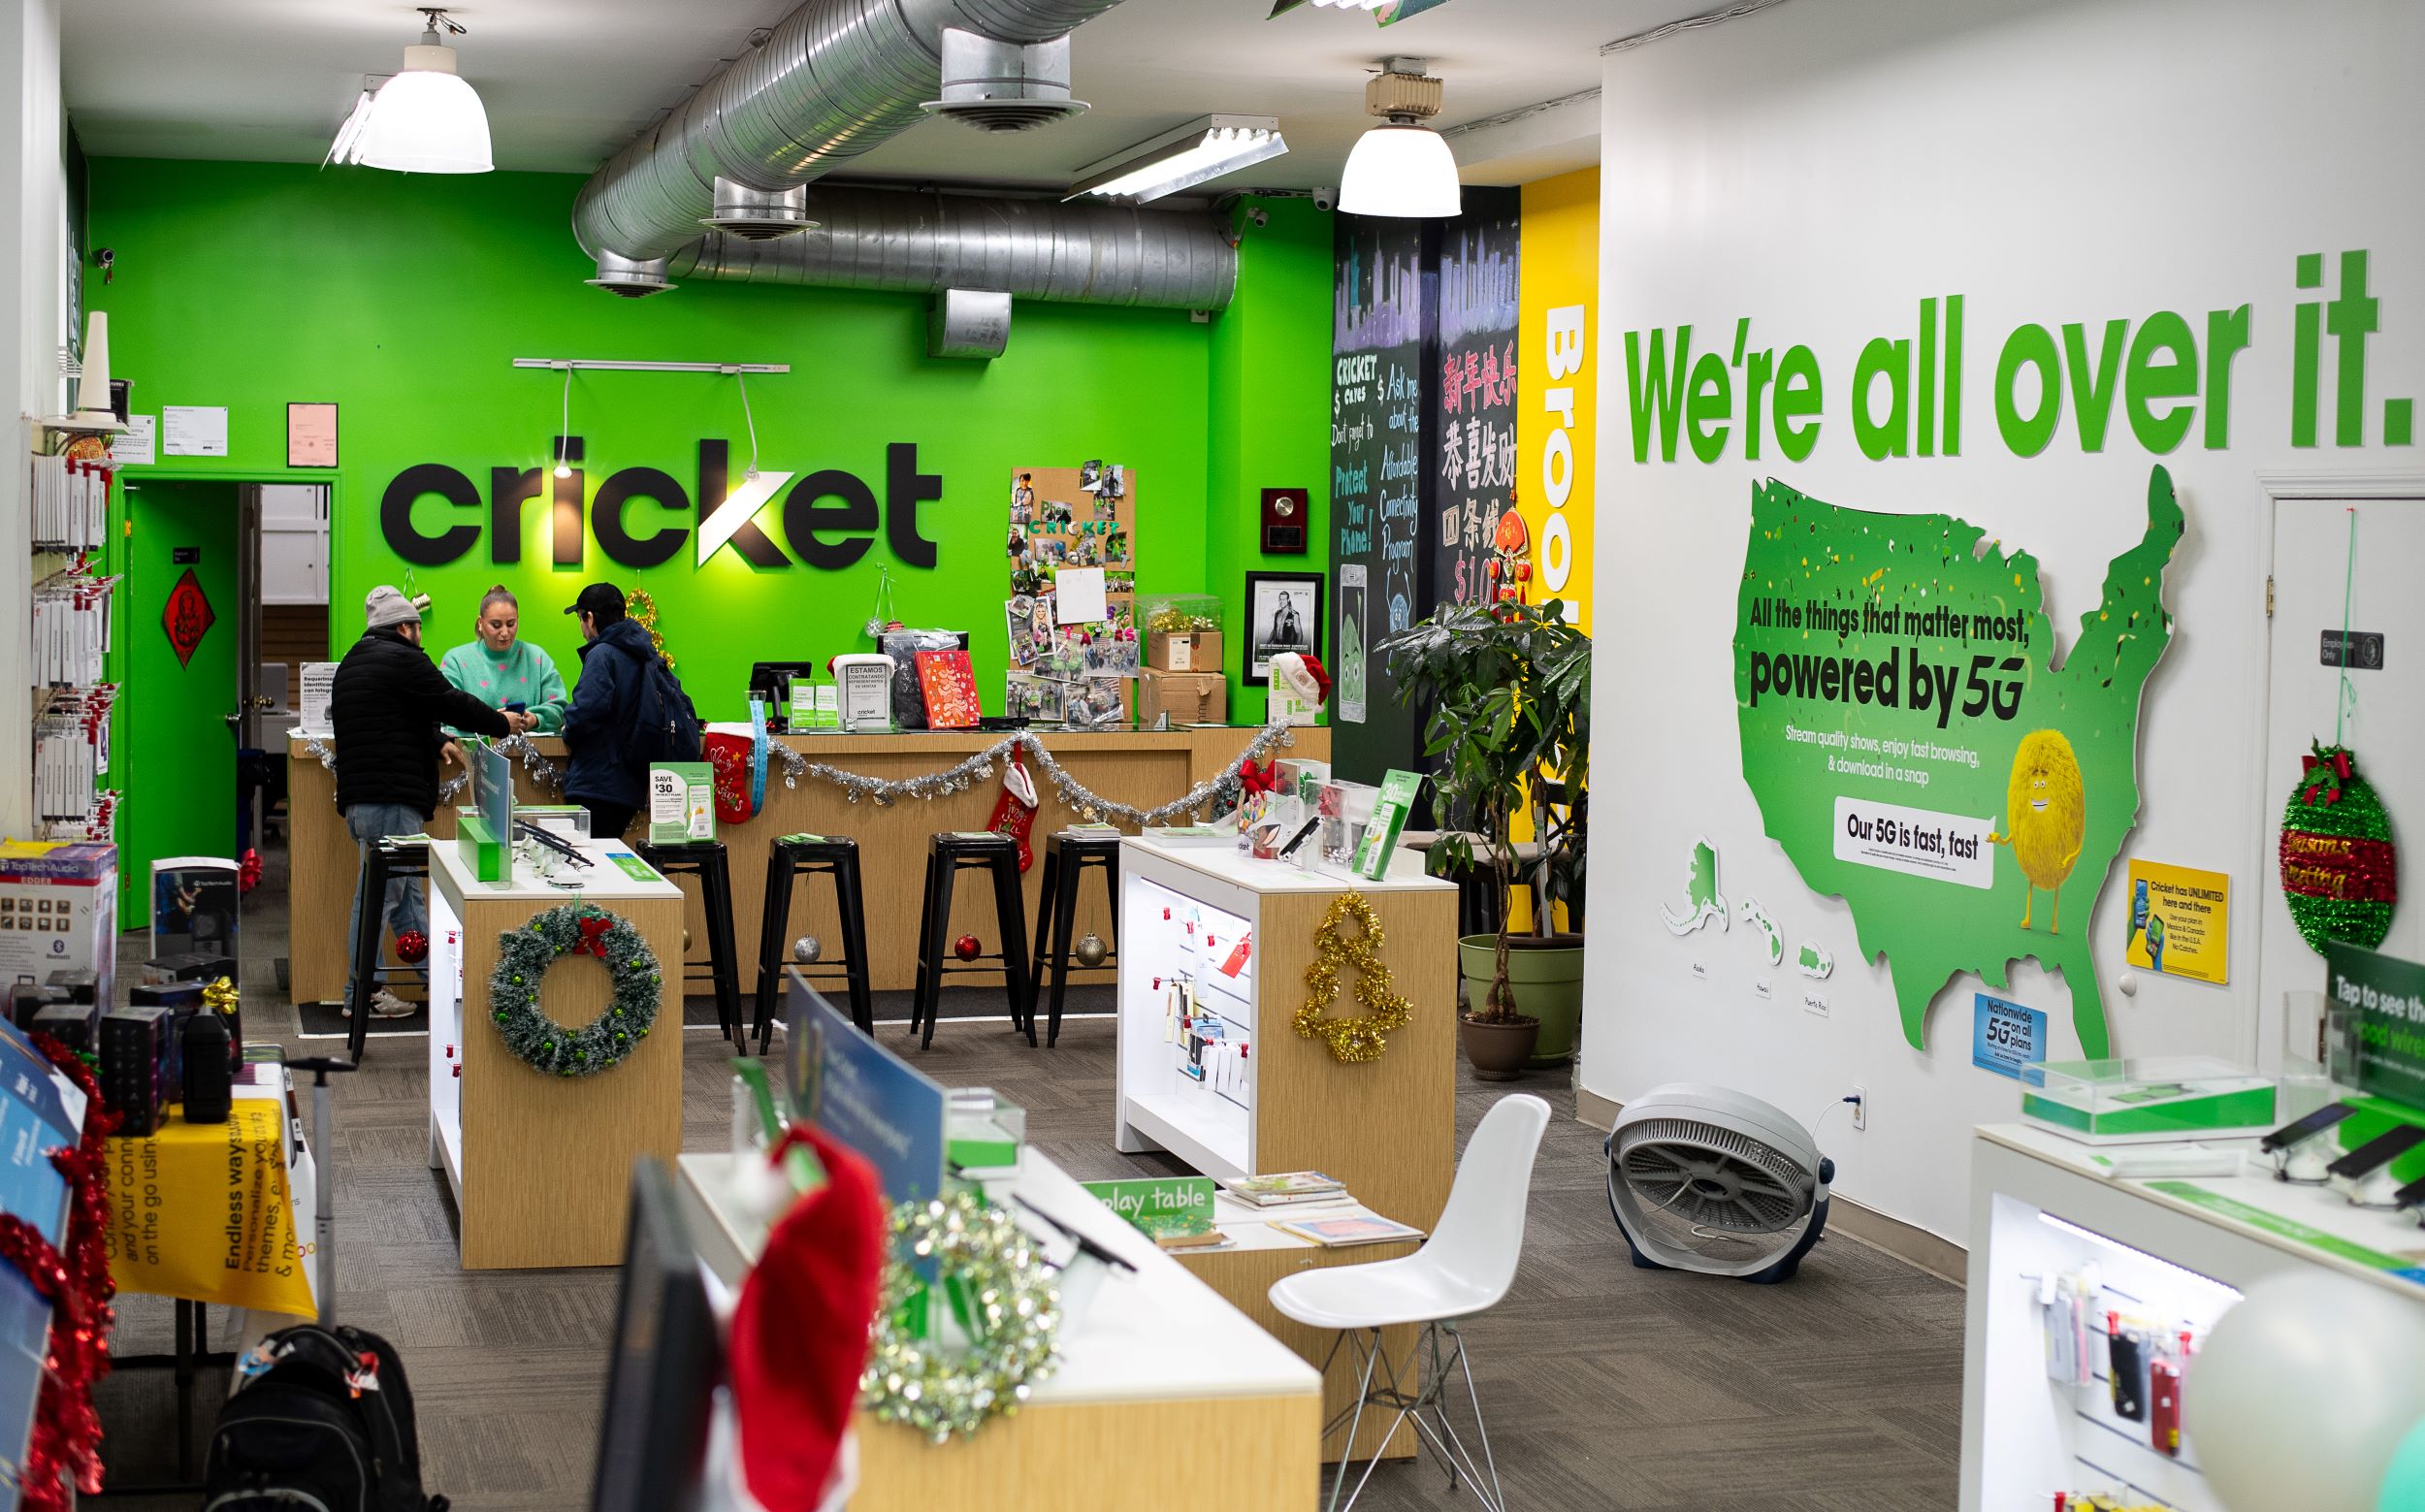 Interior of a cricket wireless store decorated with christmas ornaments. customers and employees interact near the service counters under bright lighting.